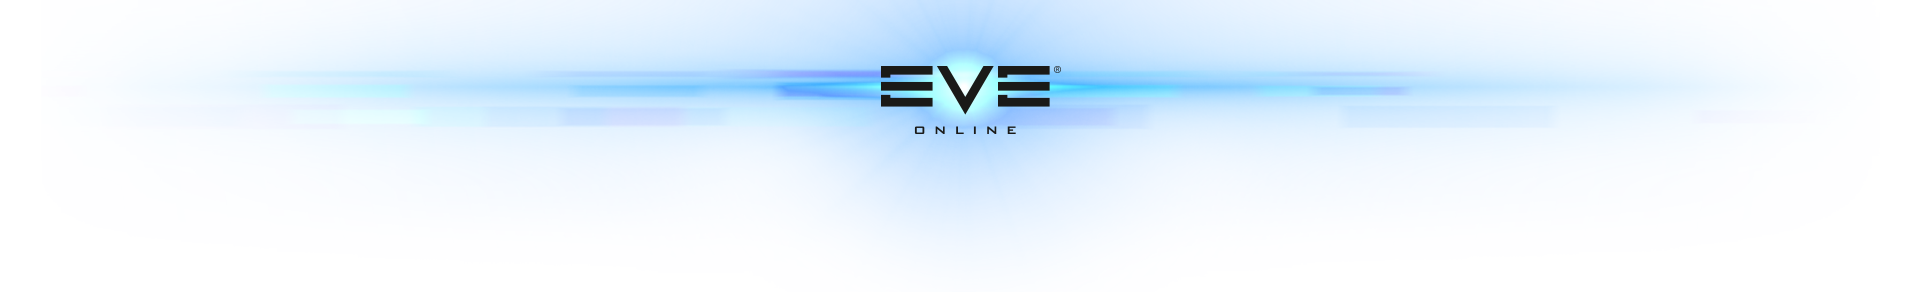 eve-logo-flare2.png